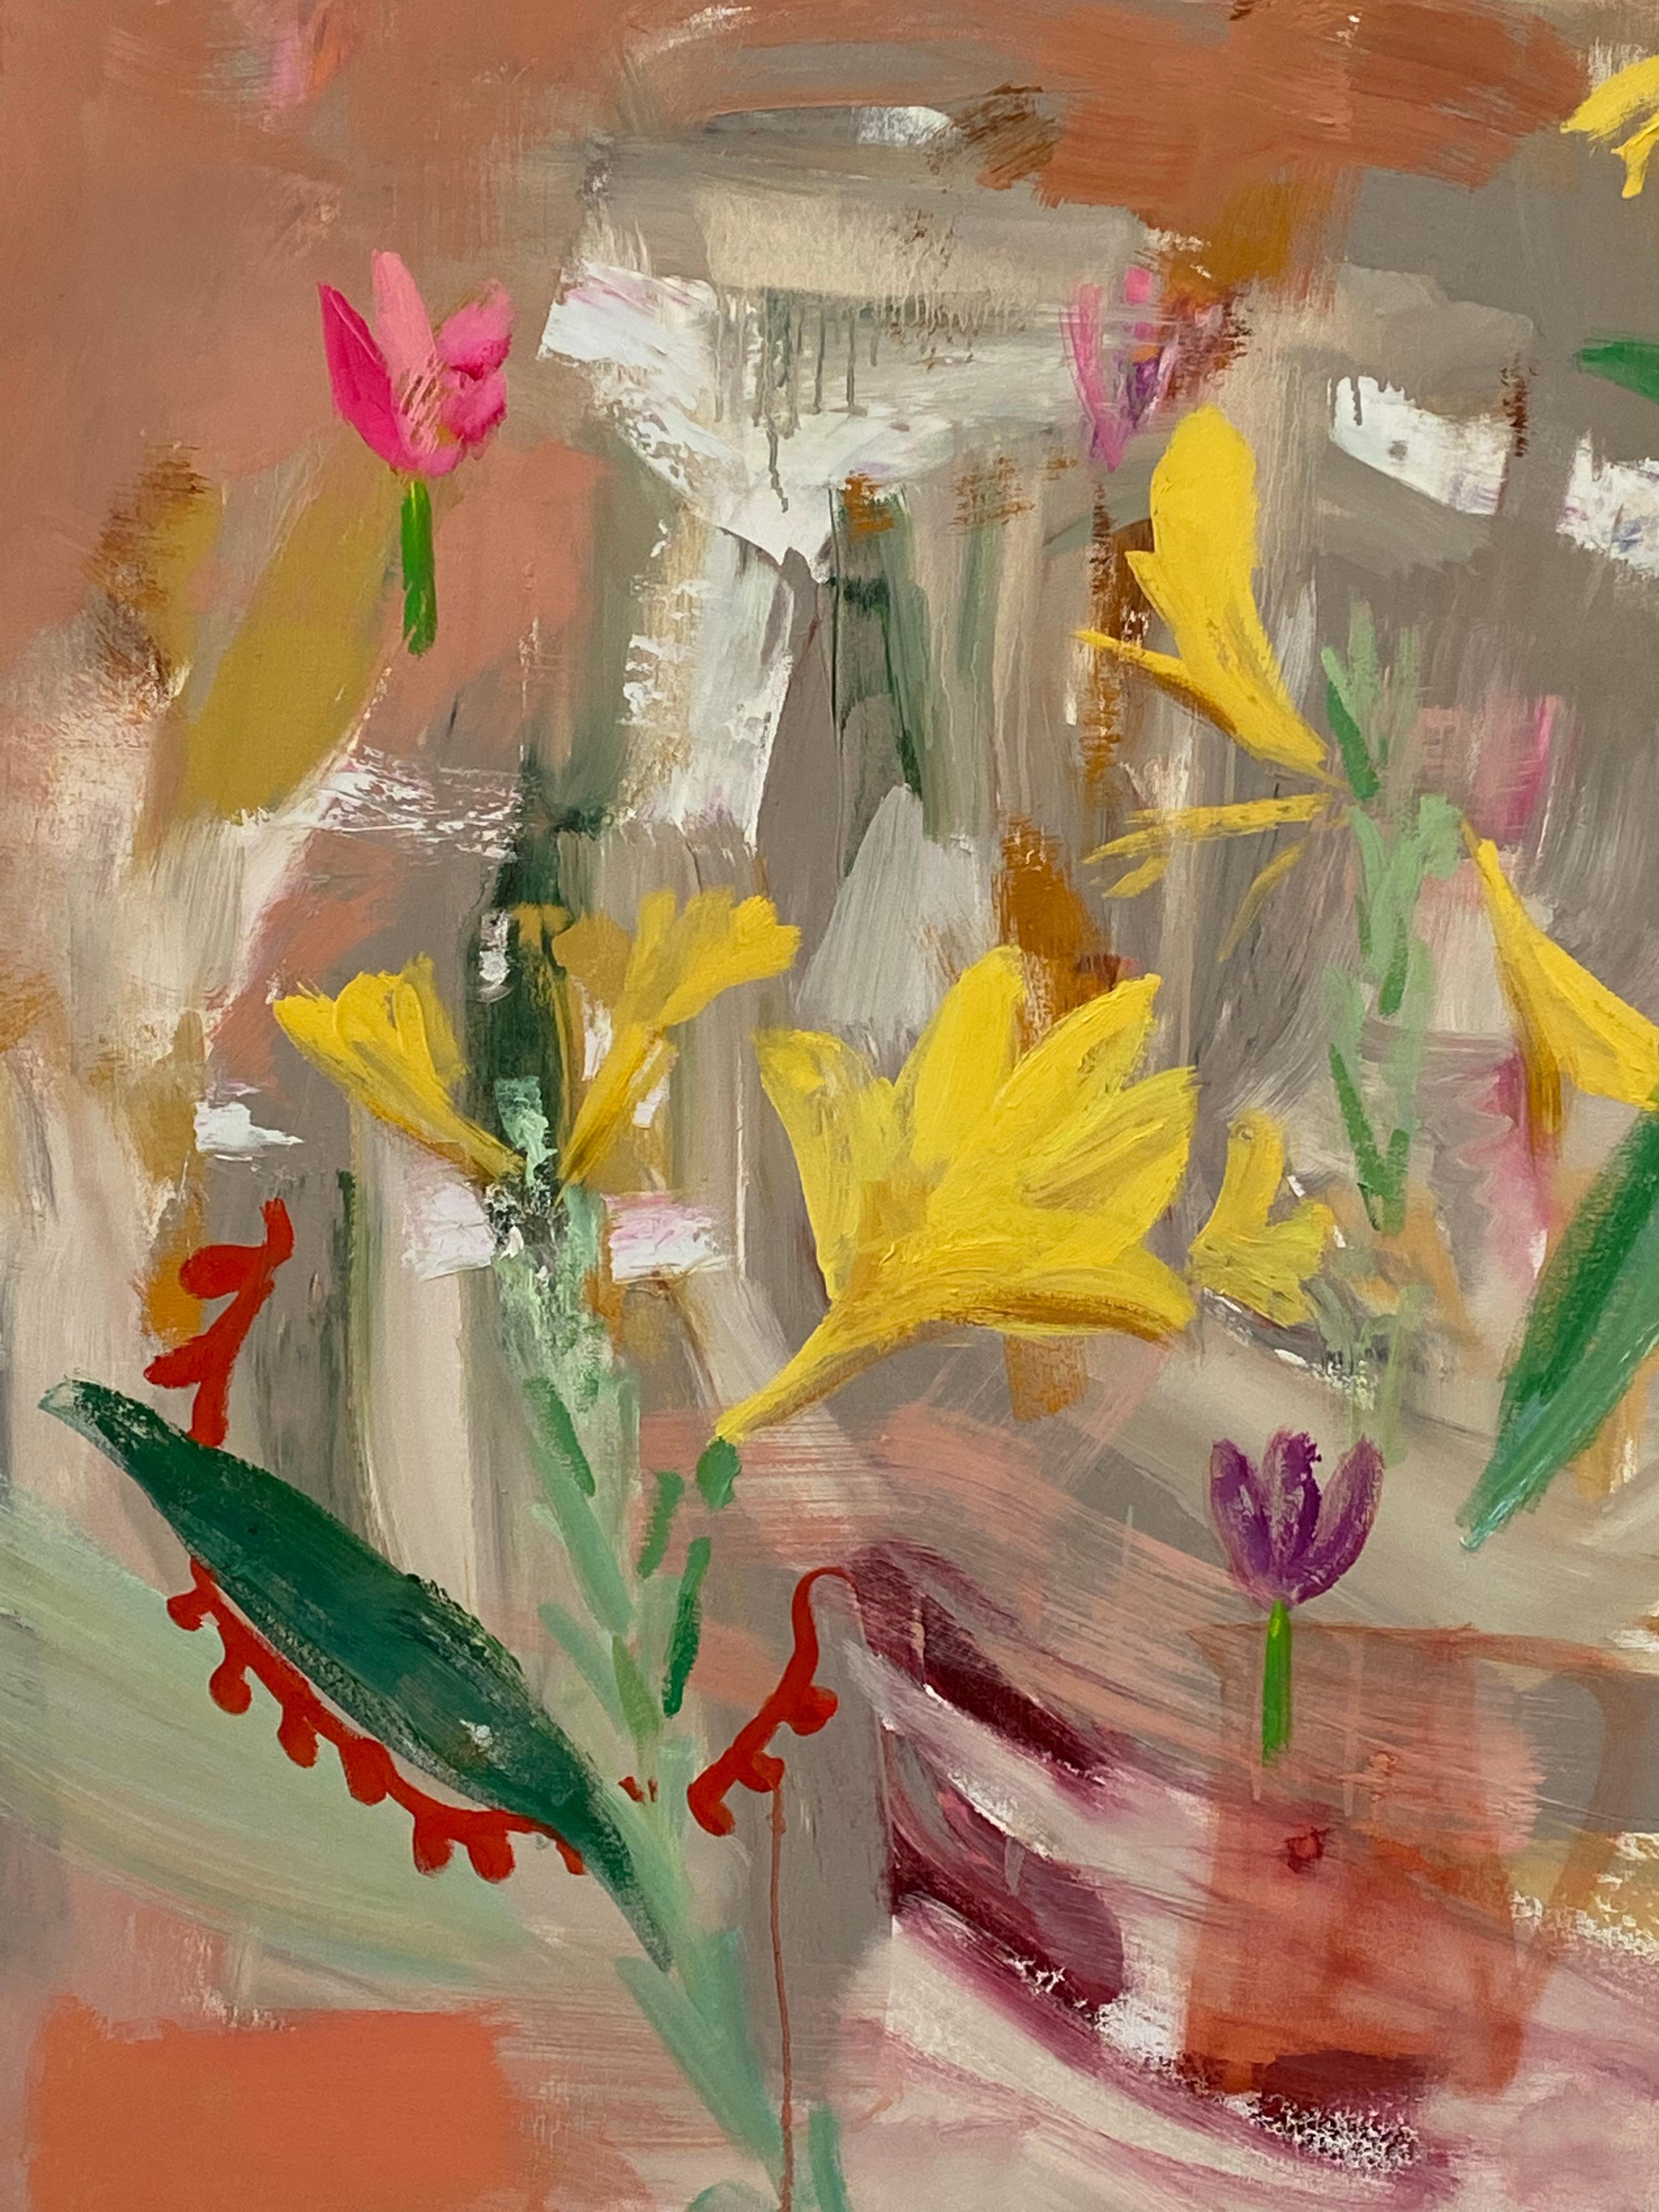 Lively abstract brushwork in bright pink, yellow, purple and lush green against a peach, pink, red, burgundy, white and gray background suggests flowers and botany. Signed, dated and titled on verso.

Pastoral and bucolic still life settings emerge